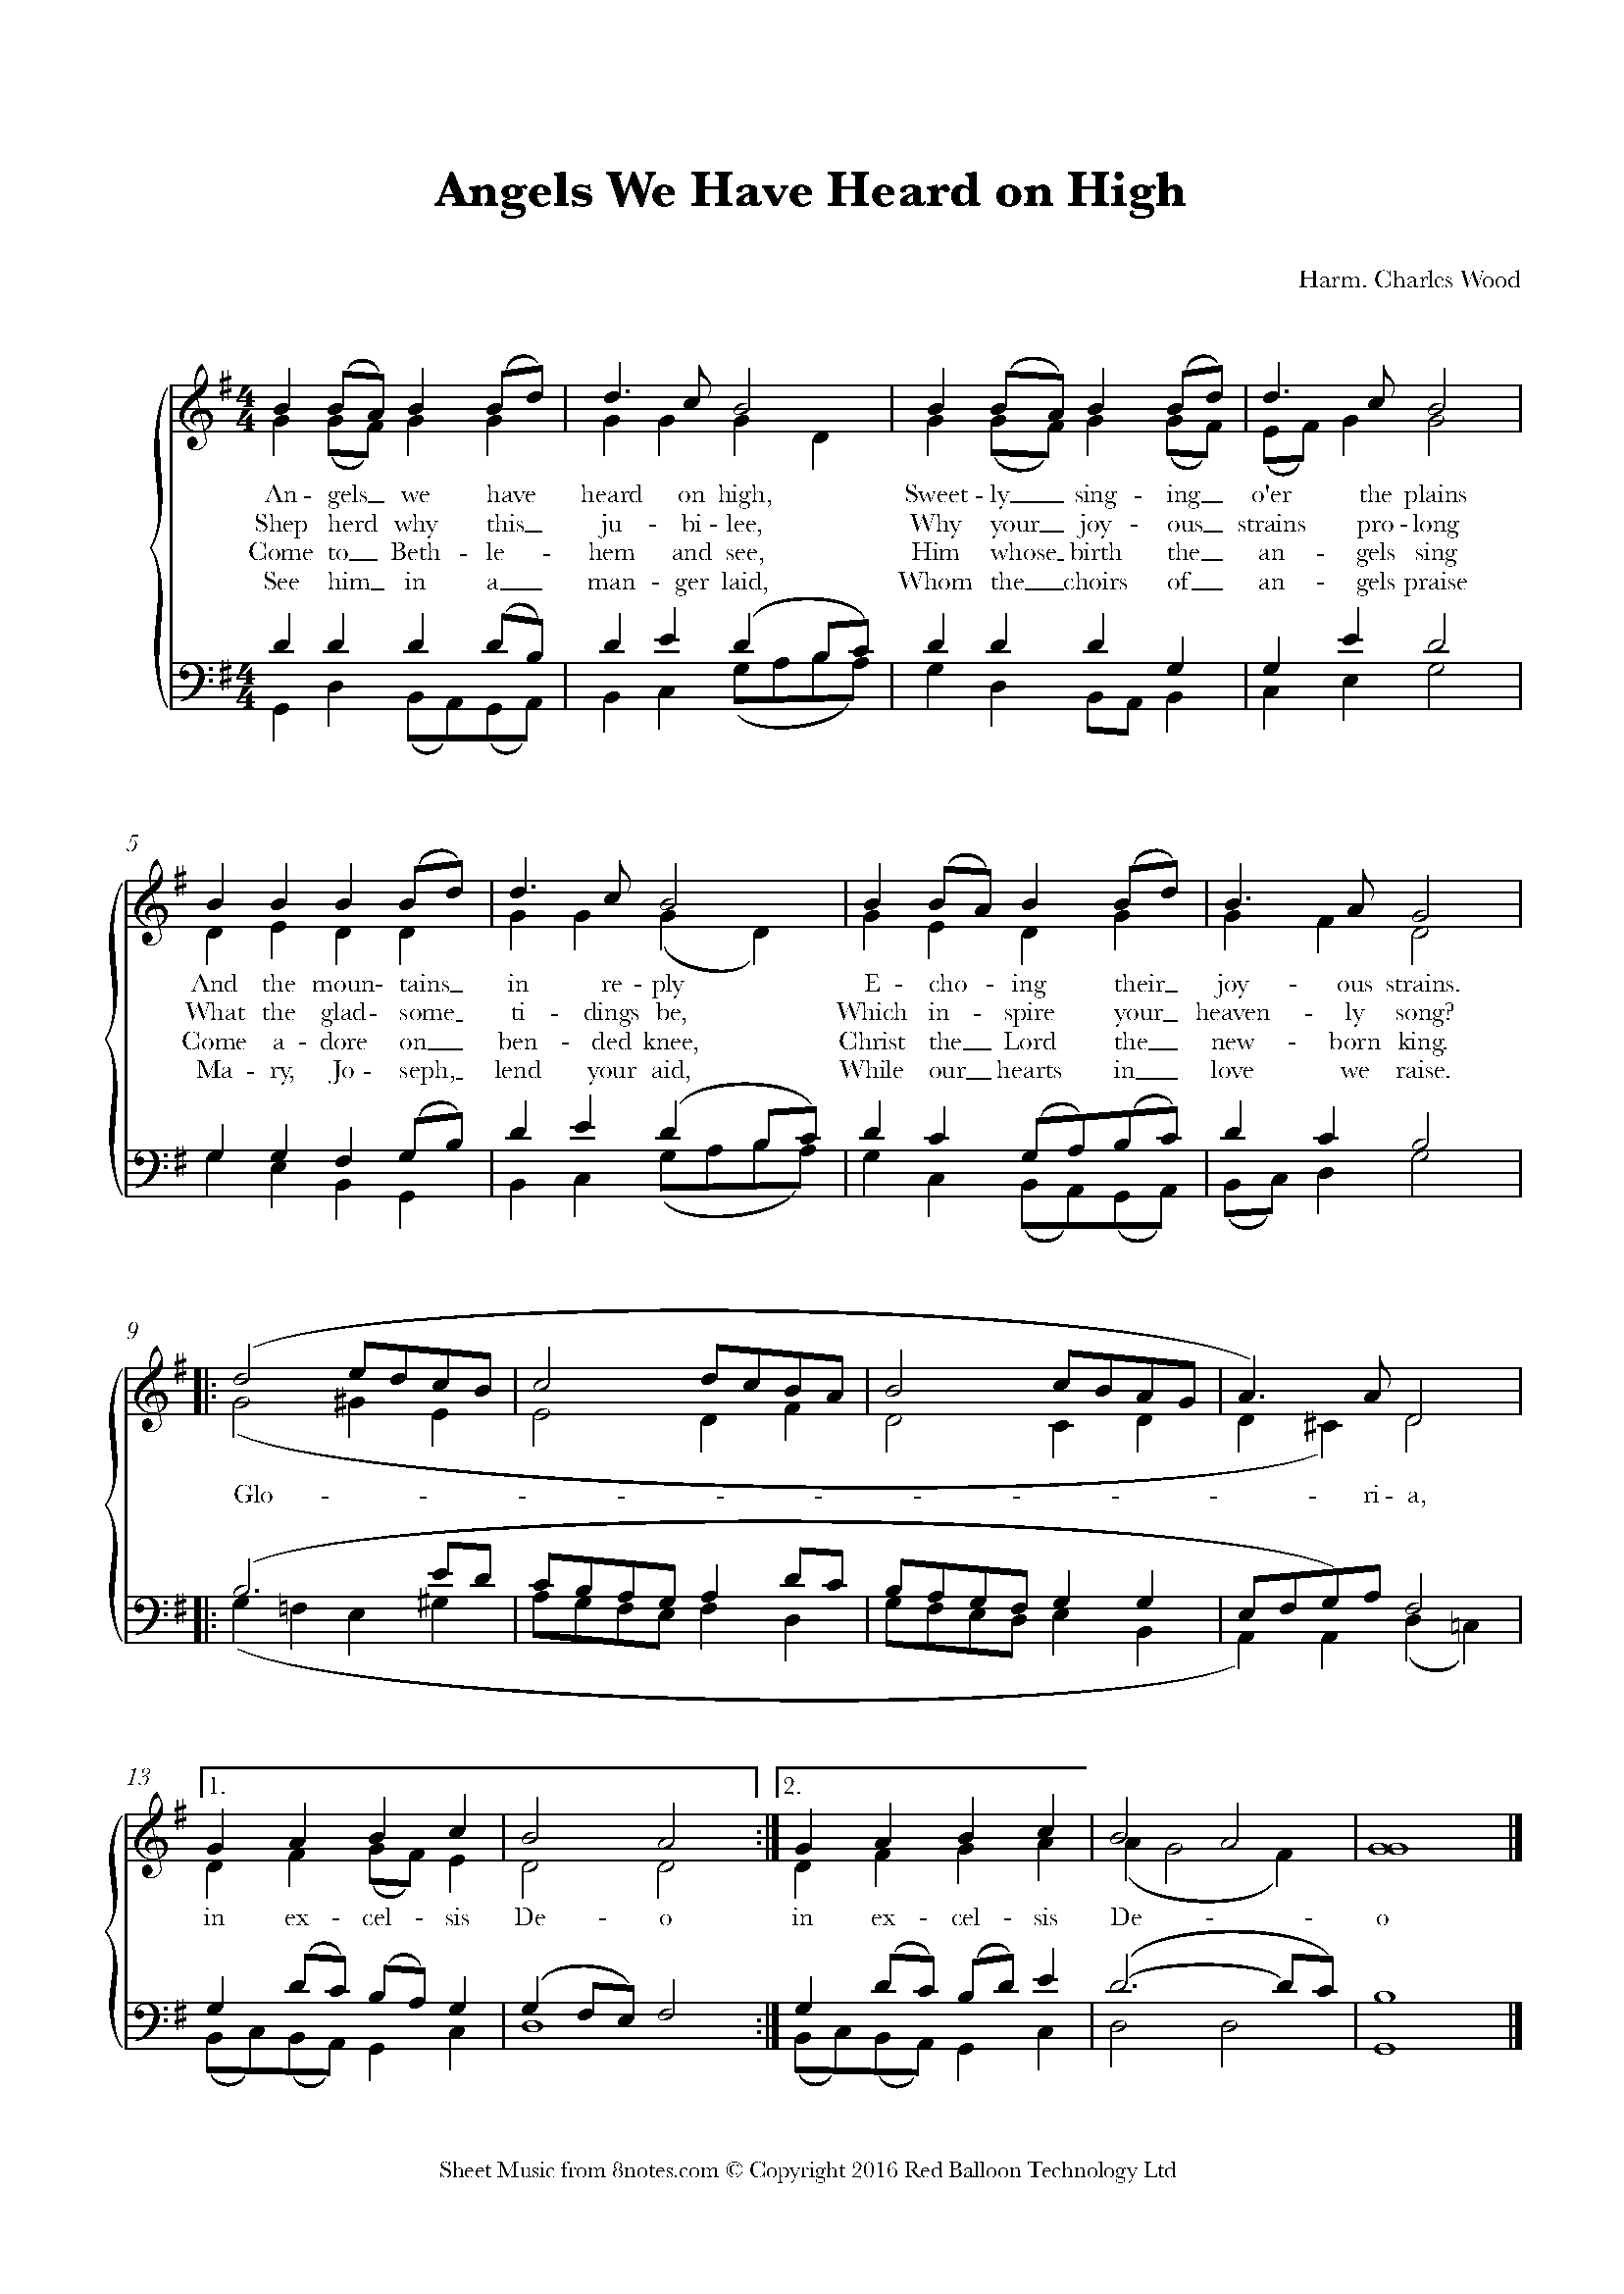 angels-we-have-heard-on-high-sheet-music-for-organ-8notes